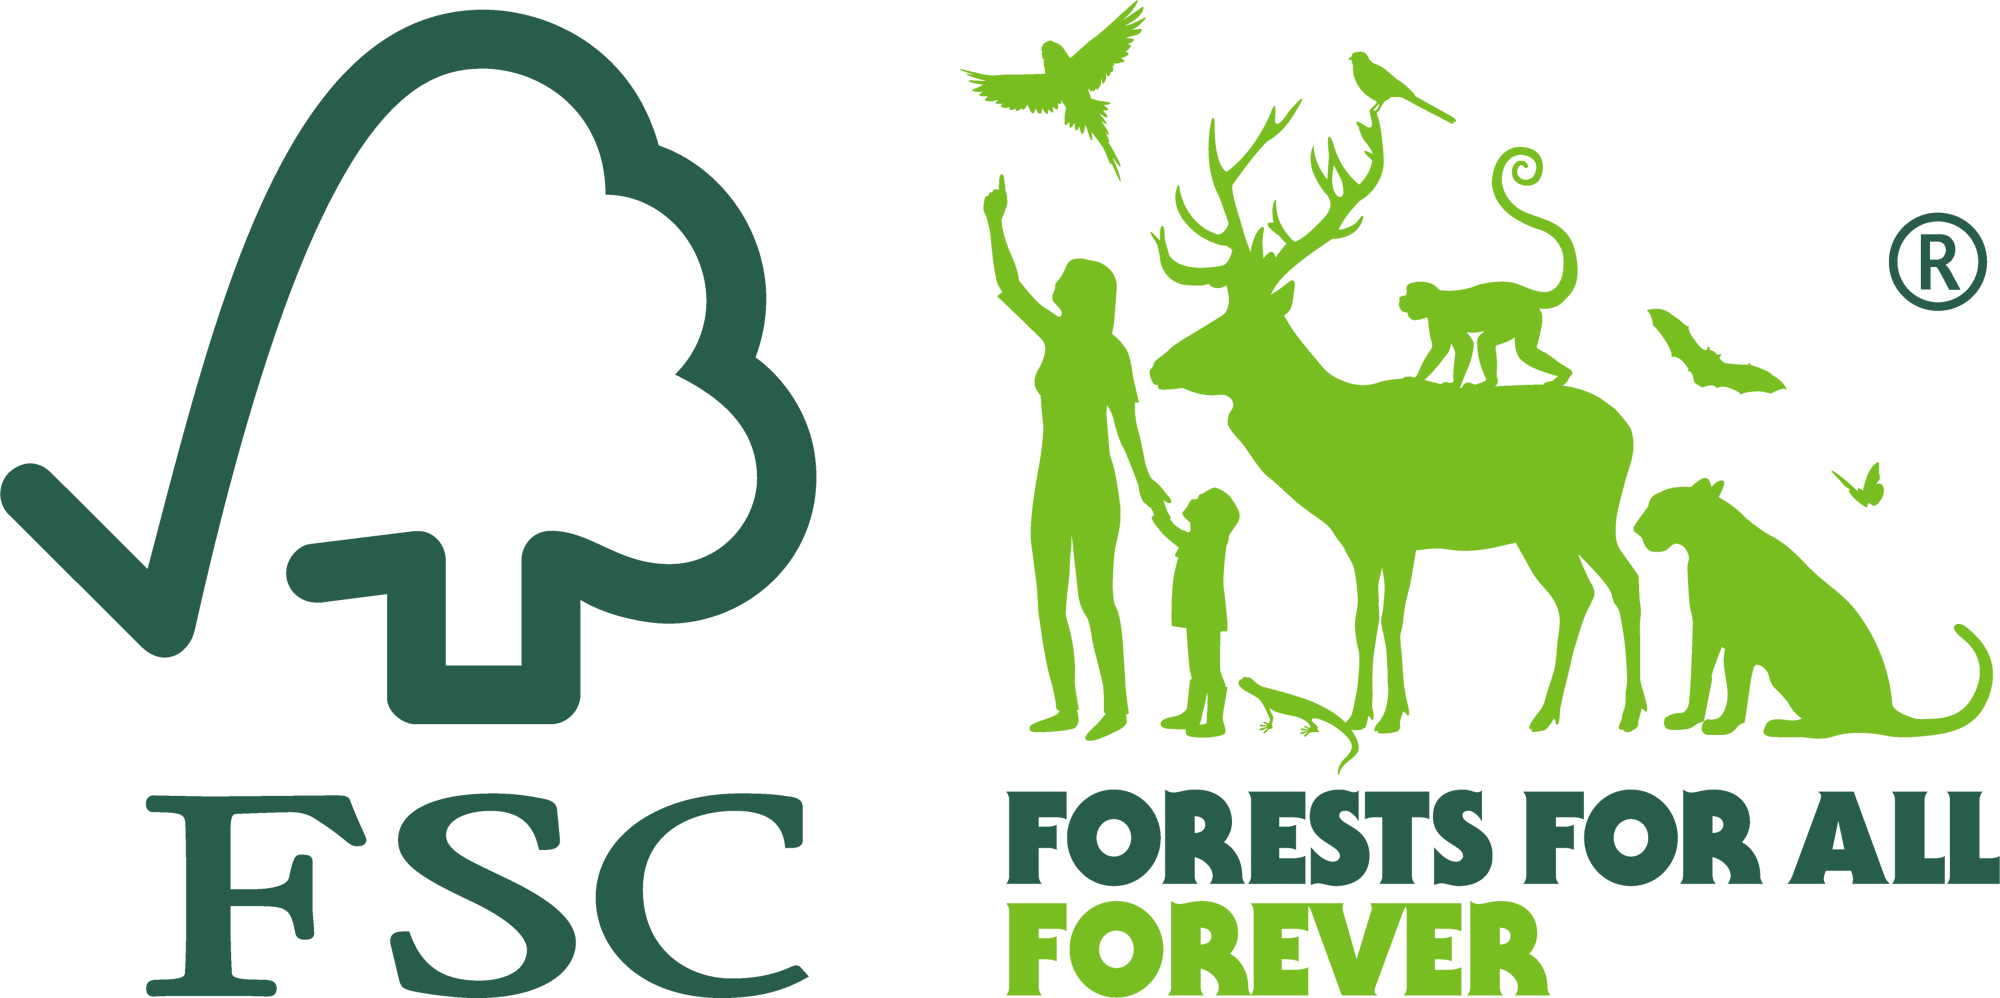 Forests For All Forever_text_R_darkgreen lightgreen_RGB (1)